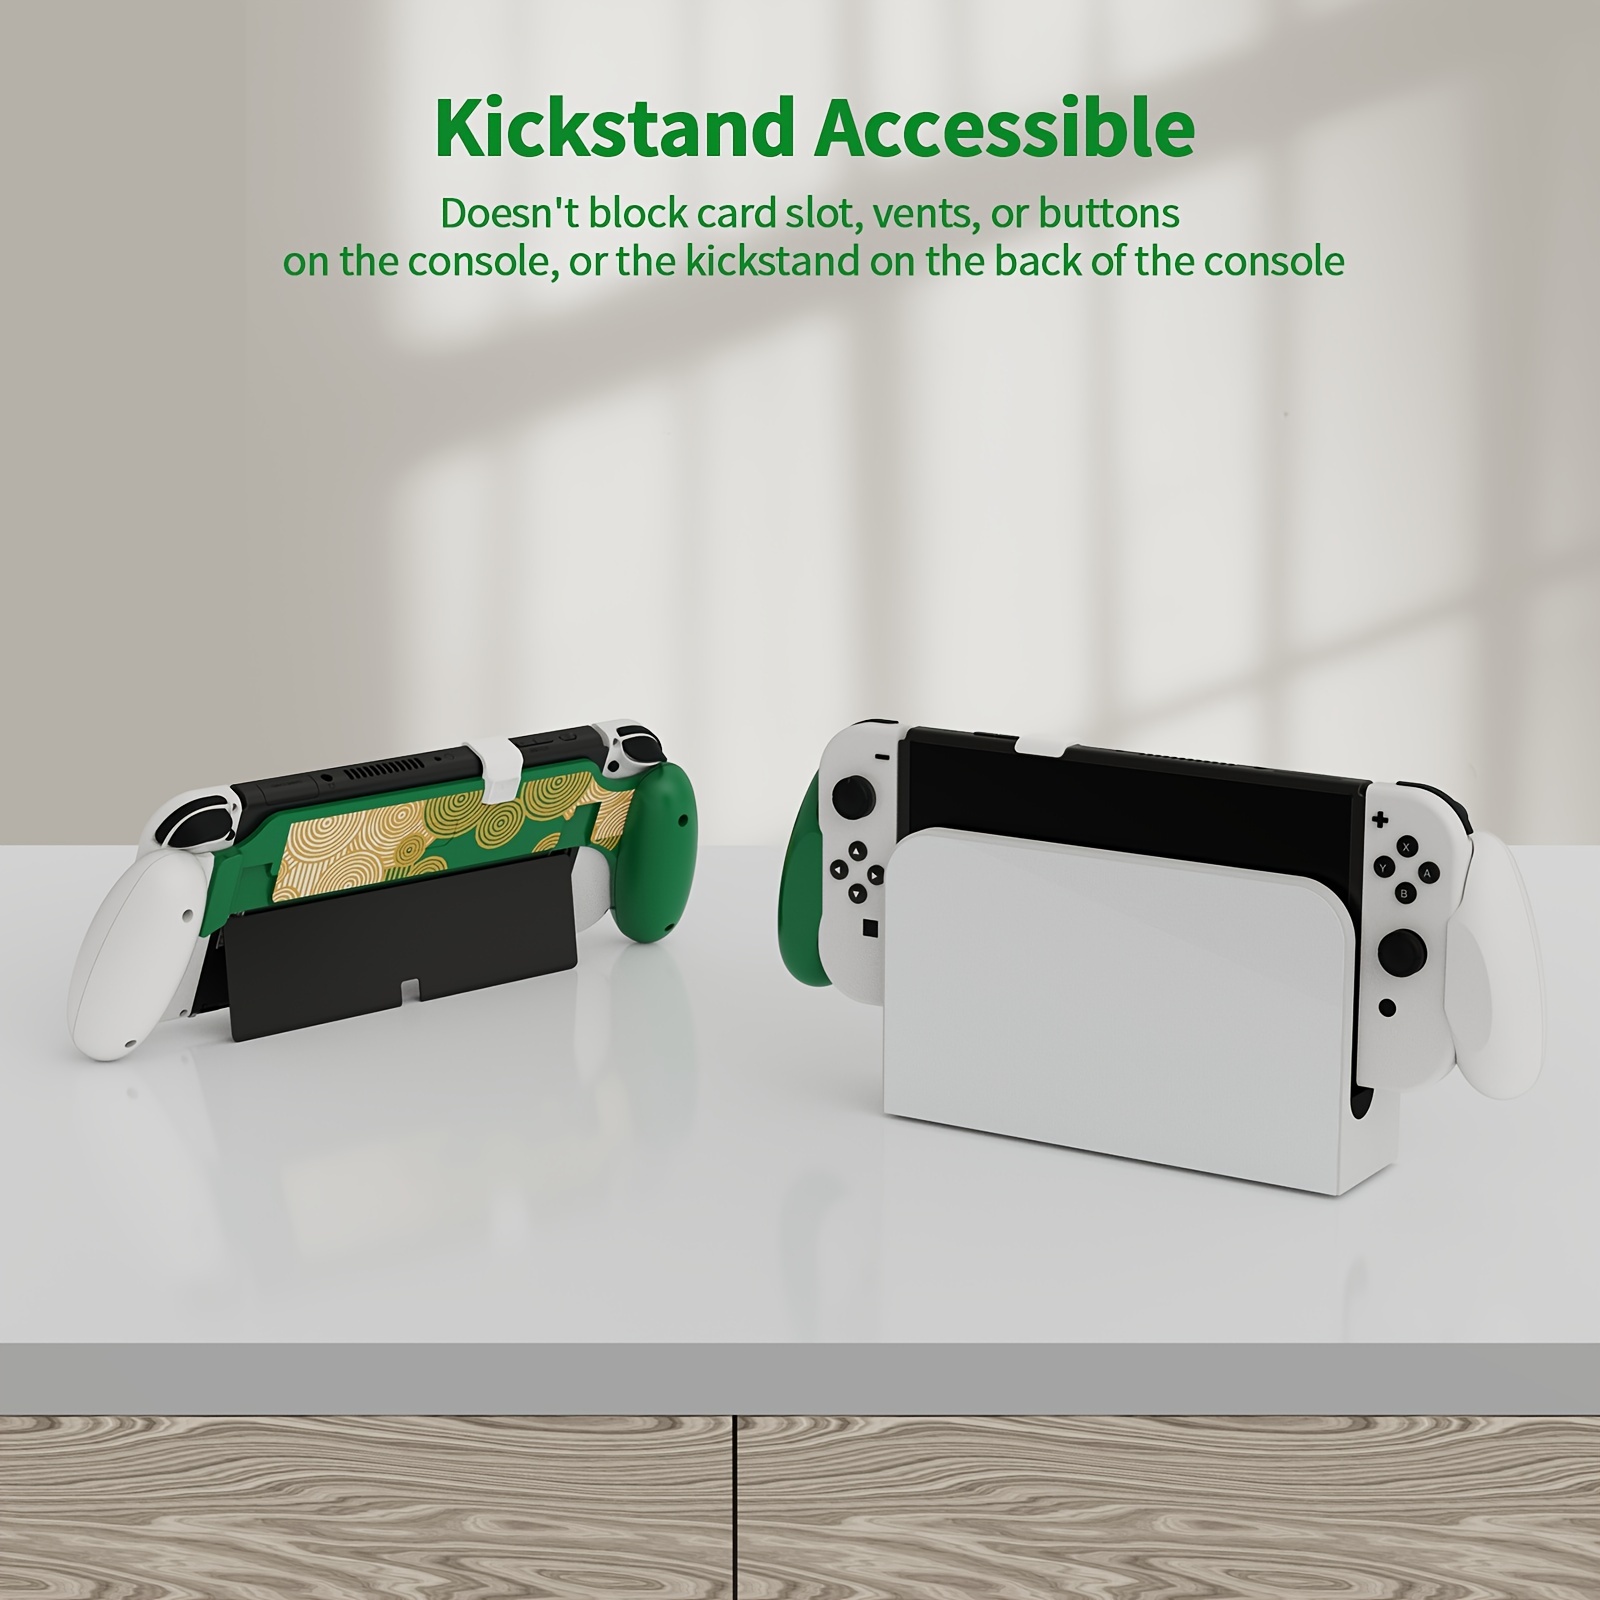 Switch OLED Grip, Switch OLED Accessories Grip with Game Storage and  Kickstand, Hand Grip Compatible with Nintendo Switch and Switch OLED